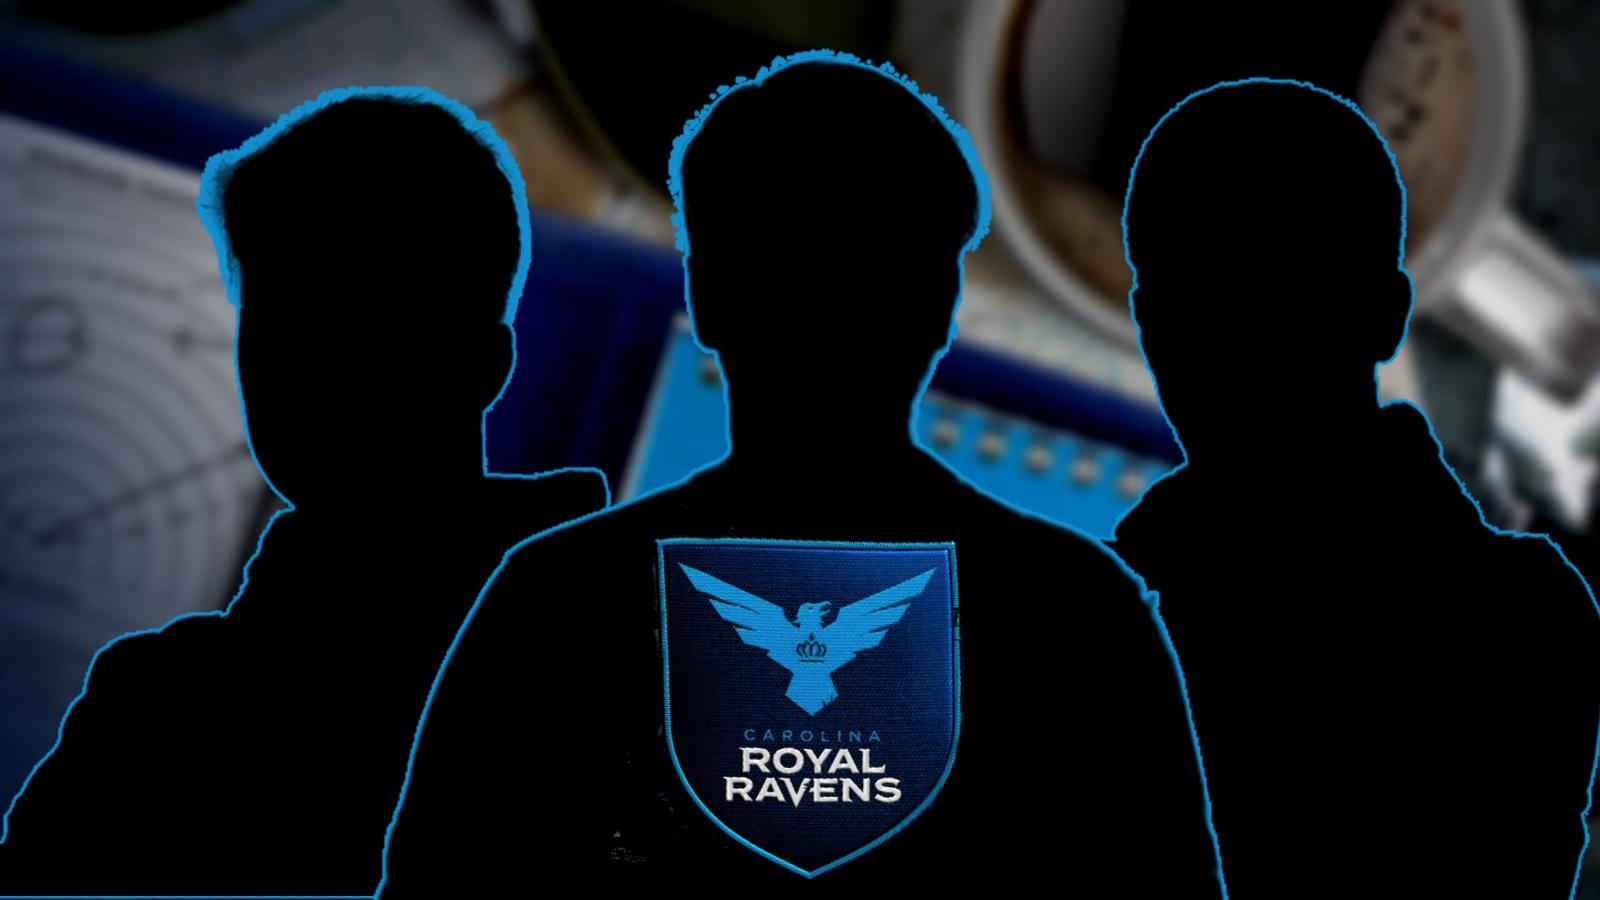 Three COD pro silhouettes with Carolina Royal Ravens logo in middle